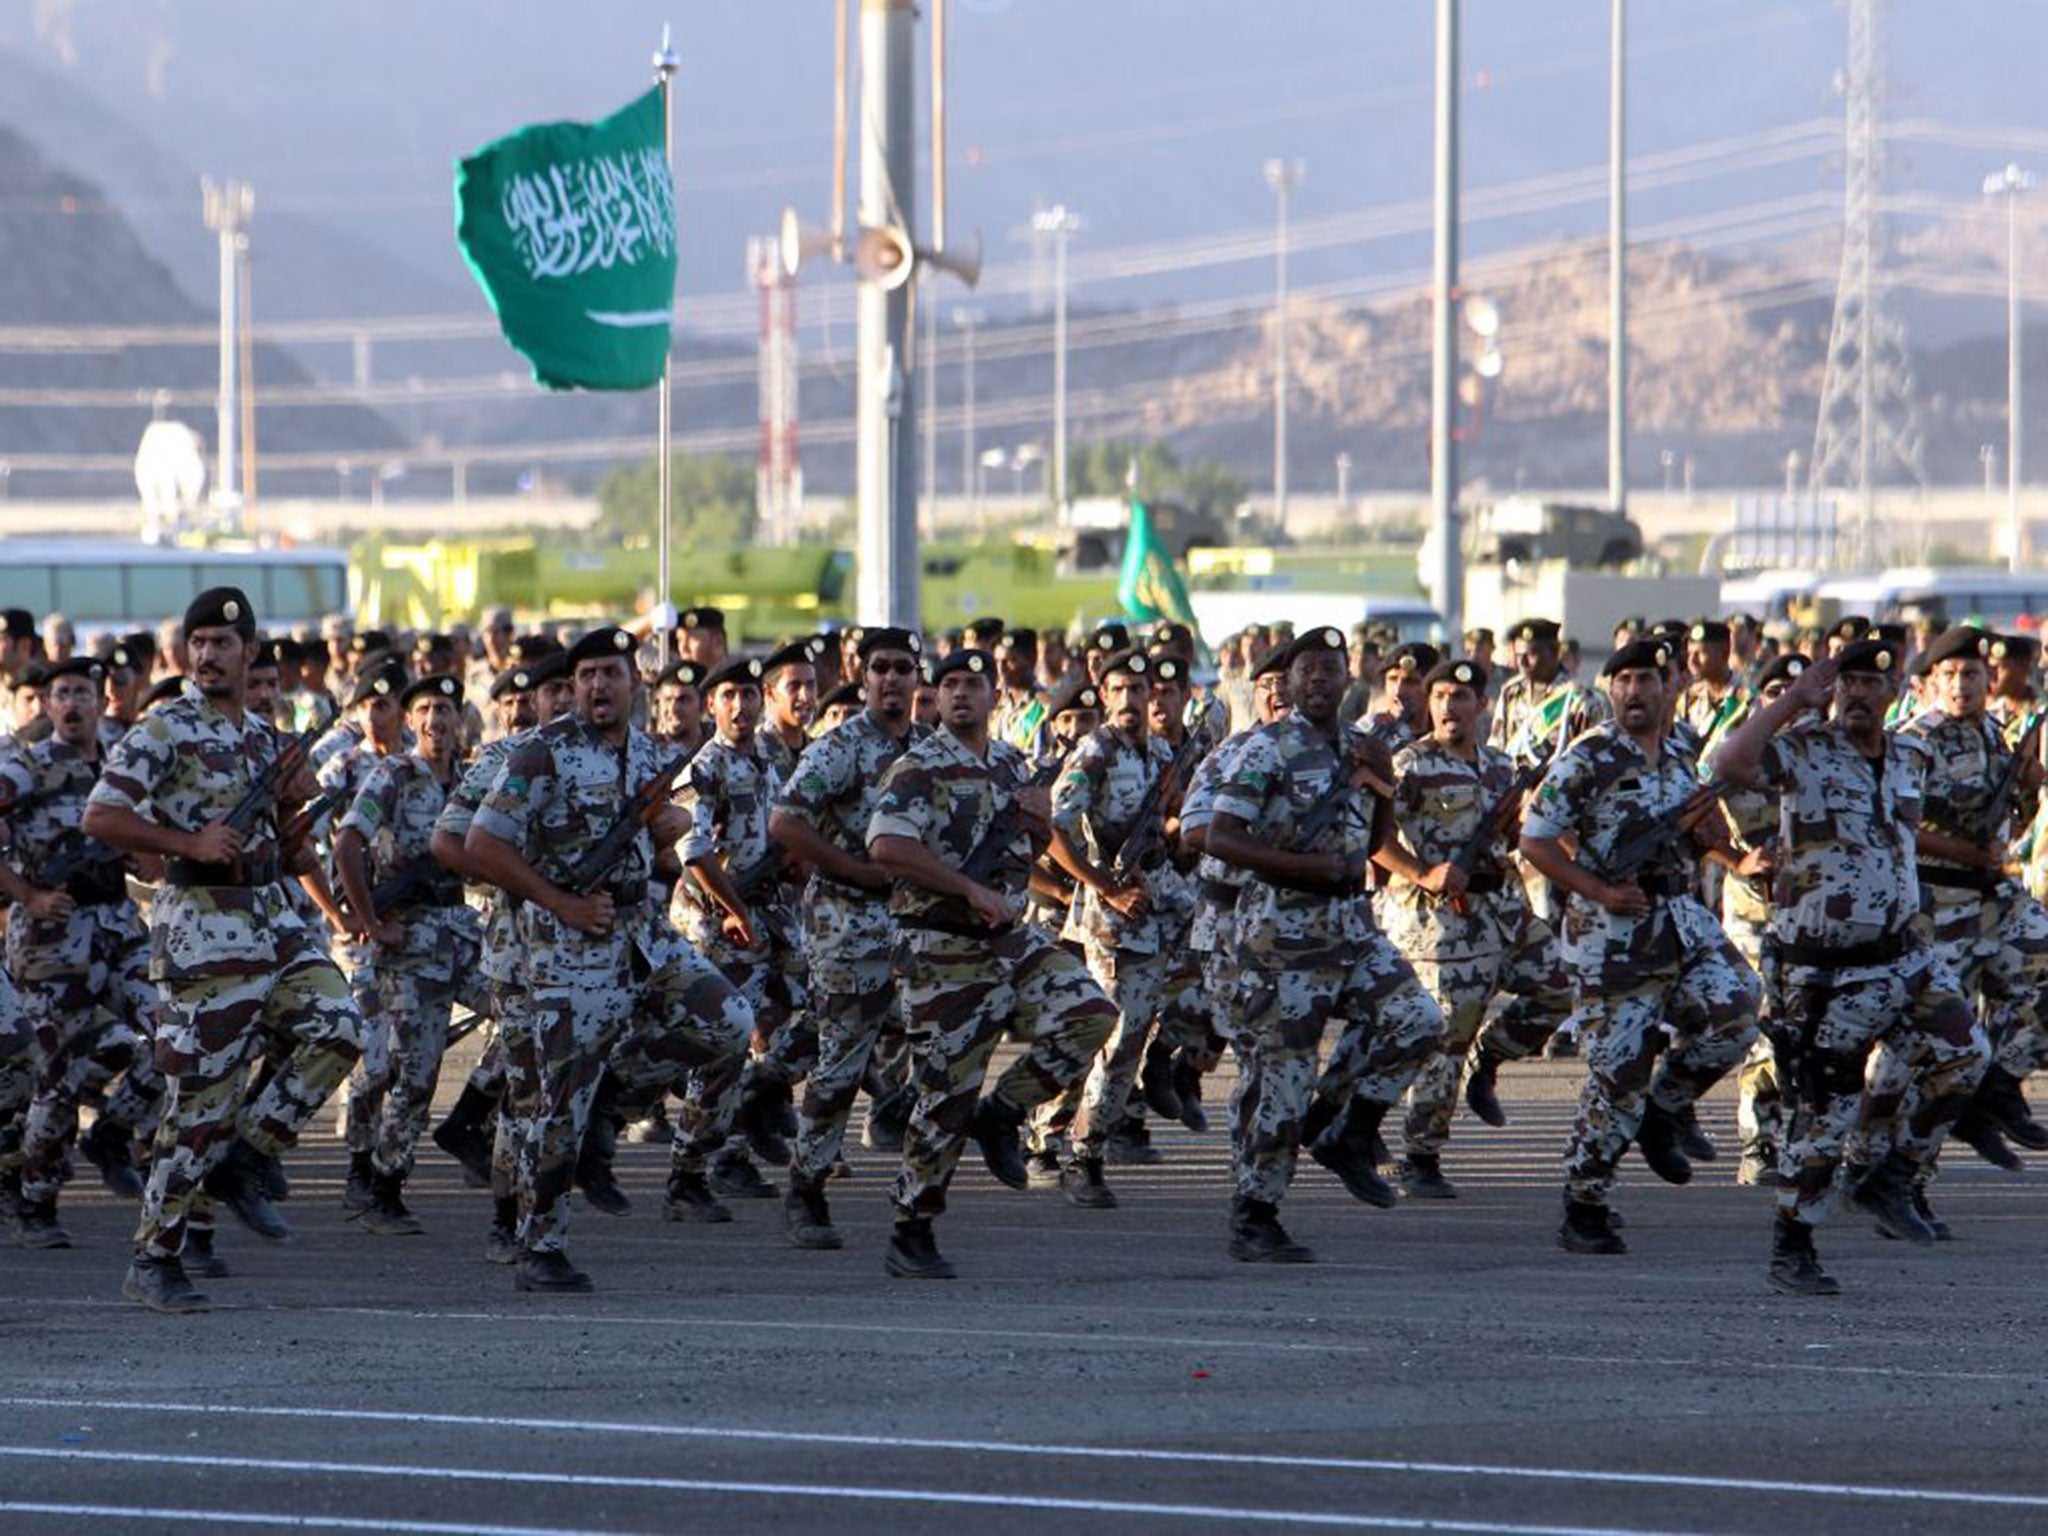 Saudi Arabia's Armed Forces presenting their skills during a military parade in 2013